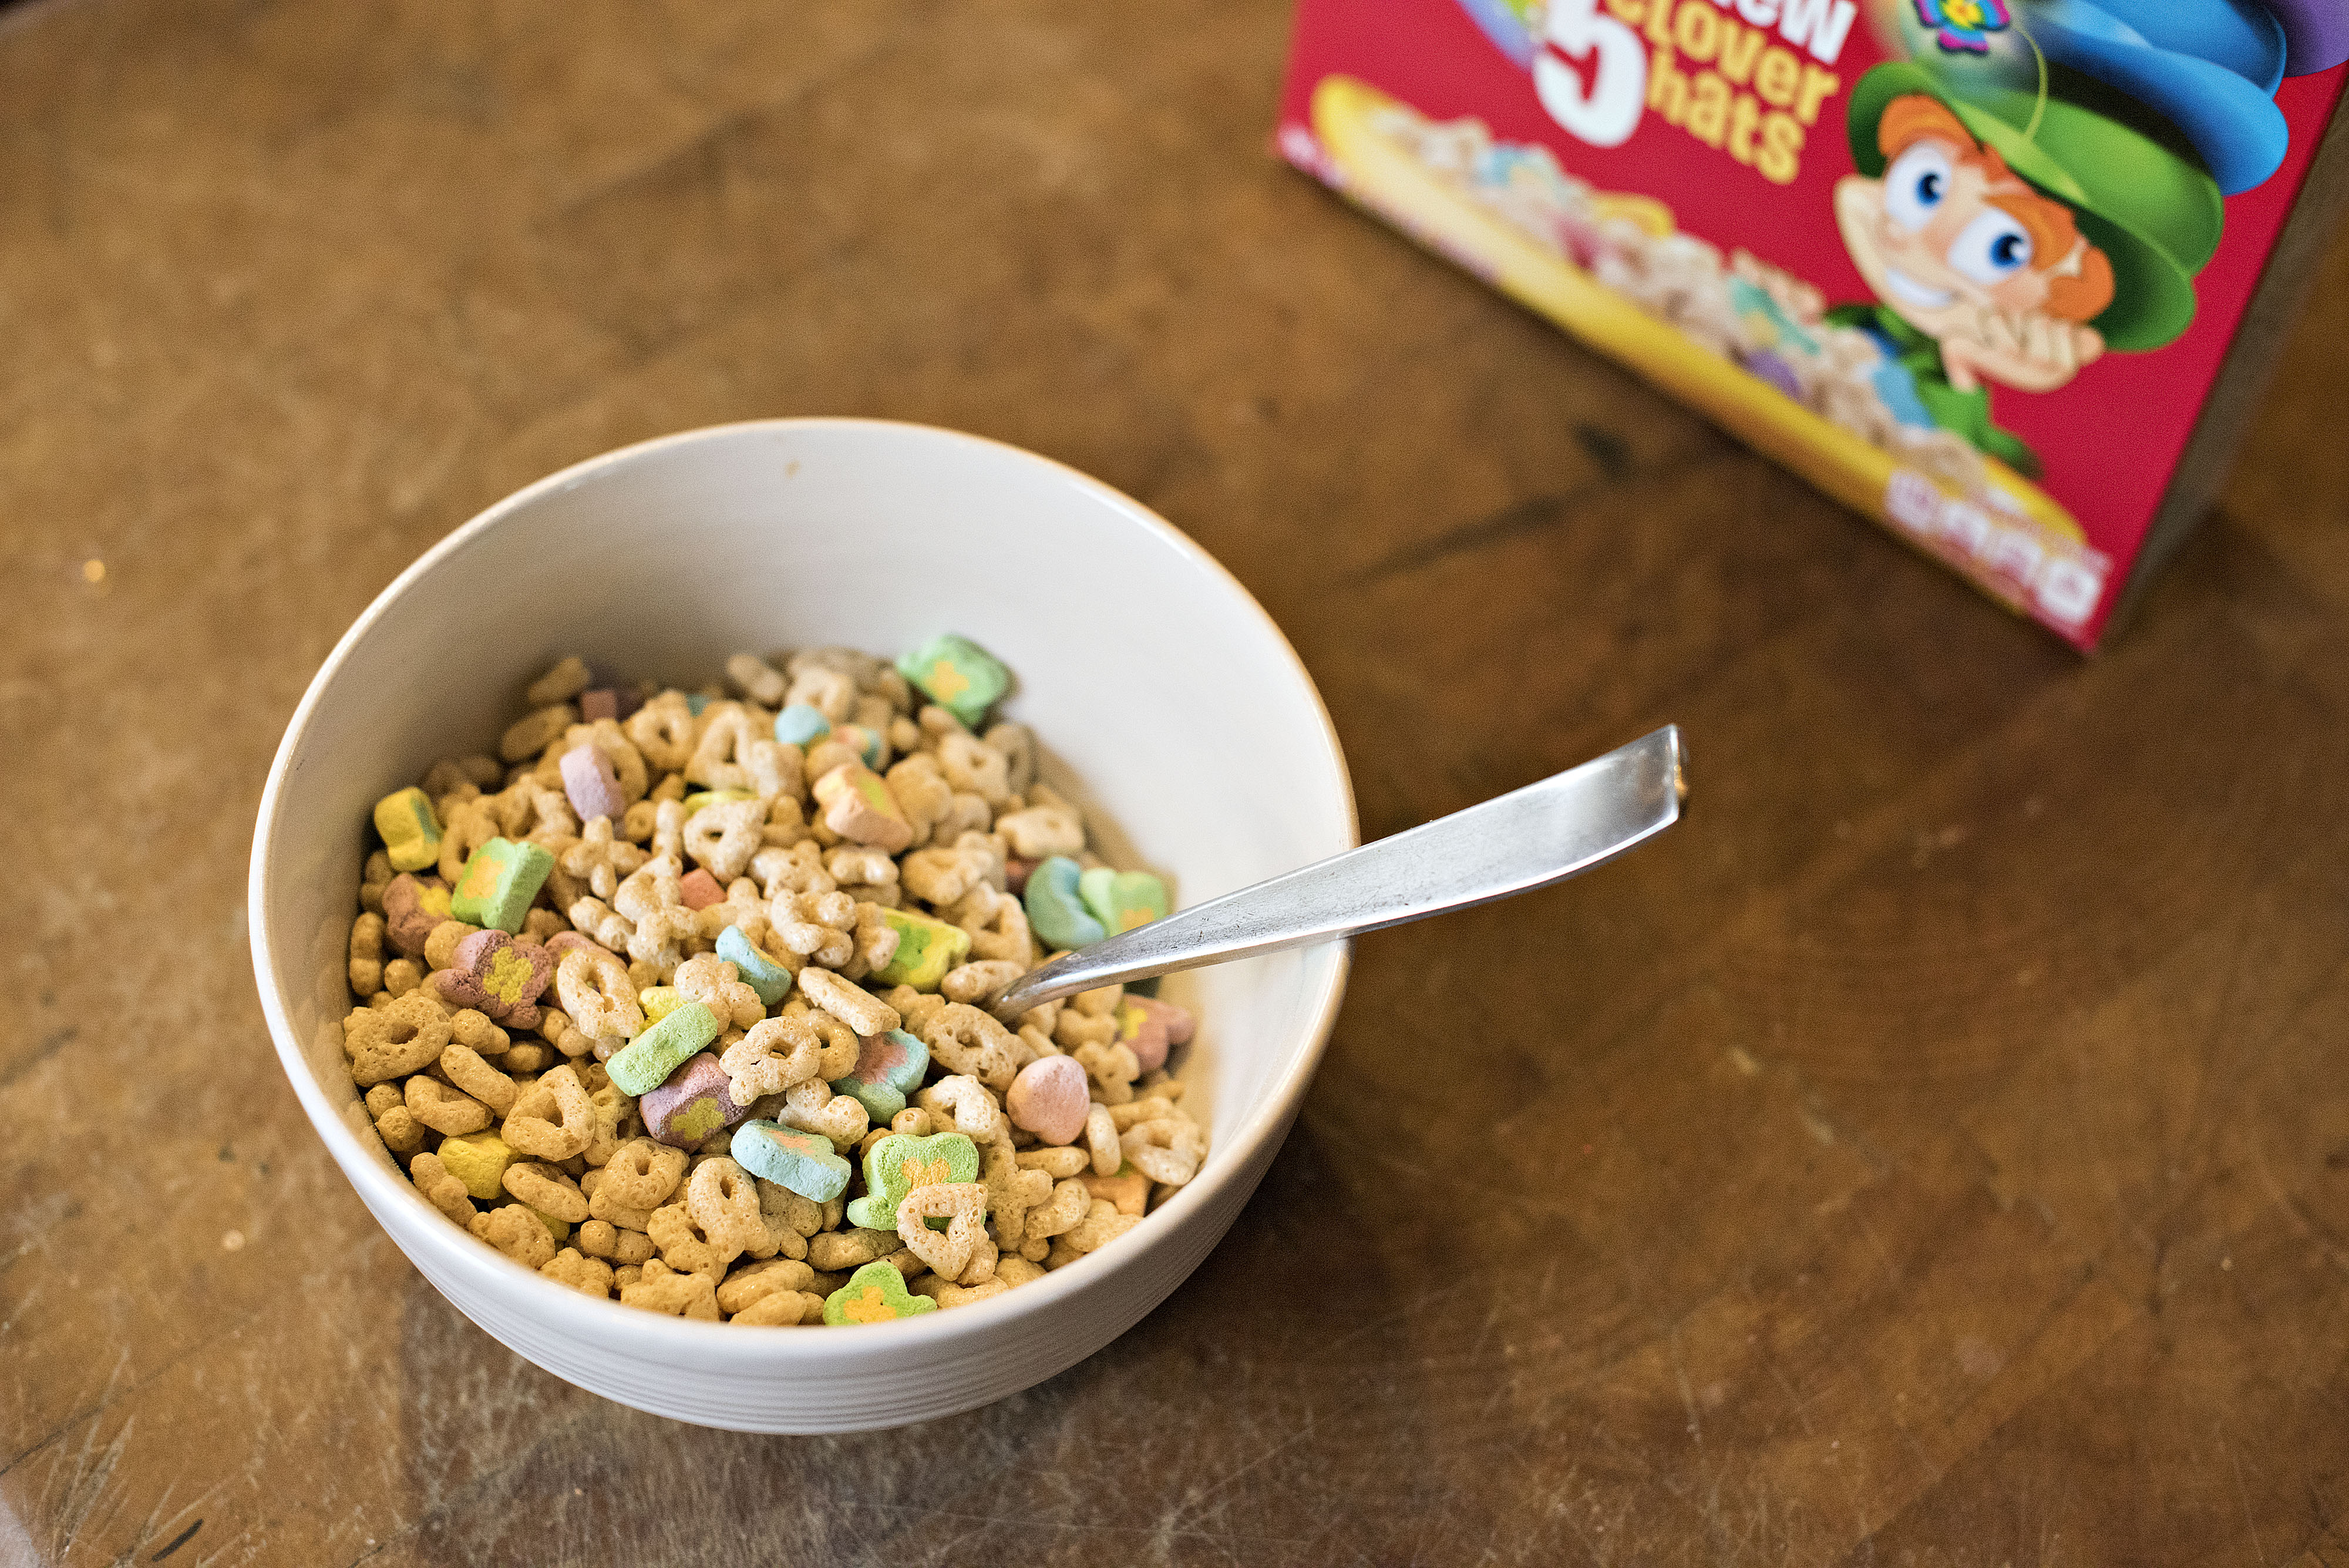 General Mills Inc. Lucky Charms brand cereal is arranged for a photograph in Tiskilwa, Illinois, U.S., on Wednesday, March 18, 2015. (Bloomberg—Getty Images)